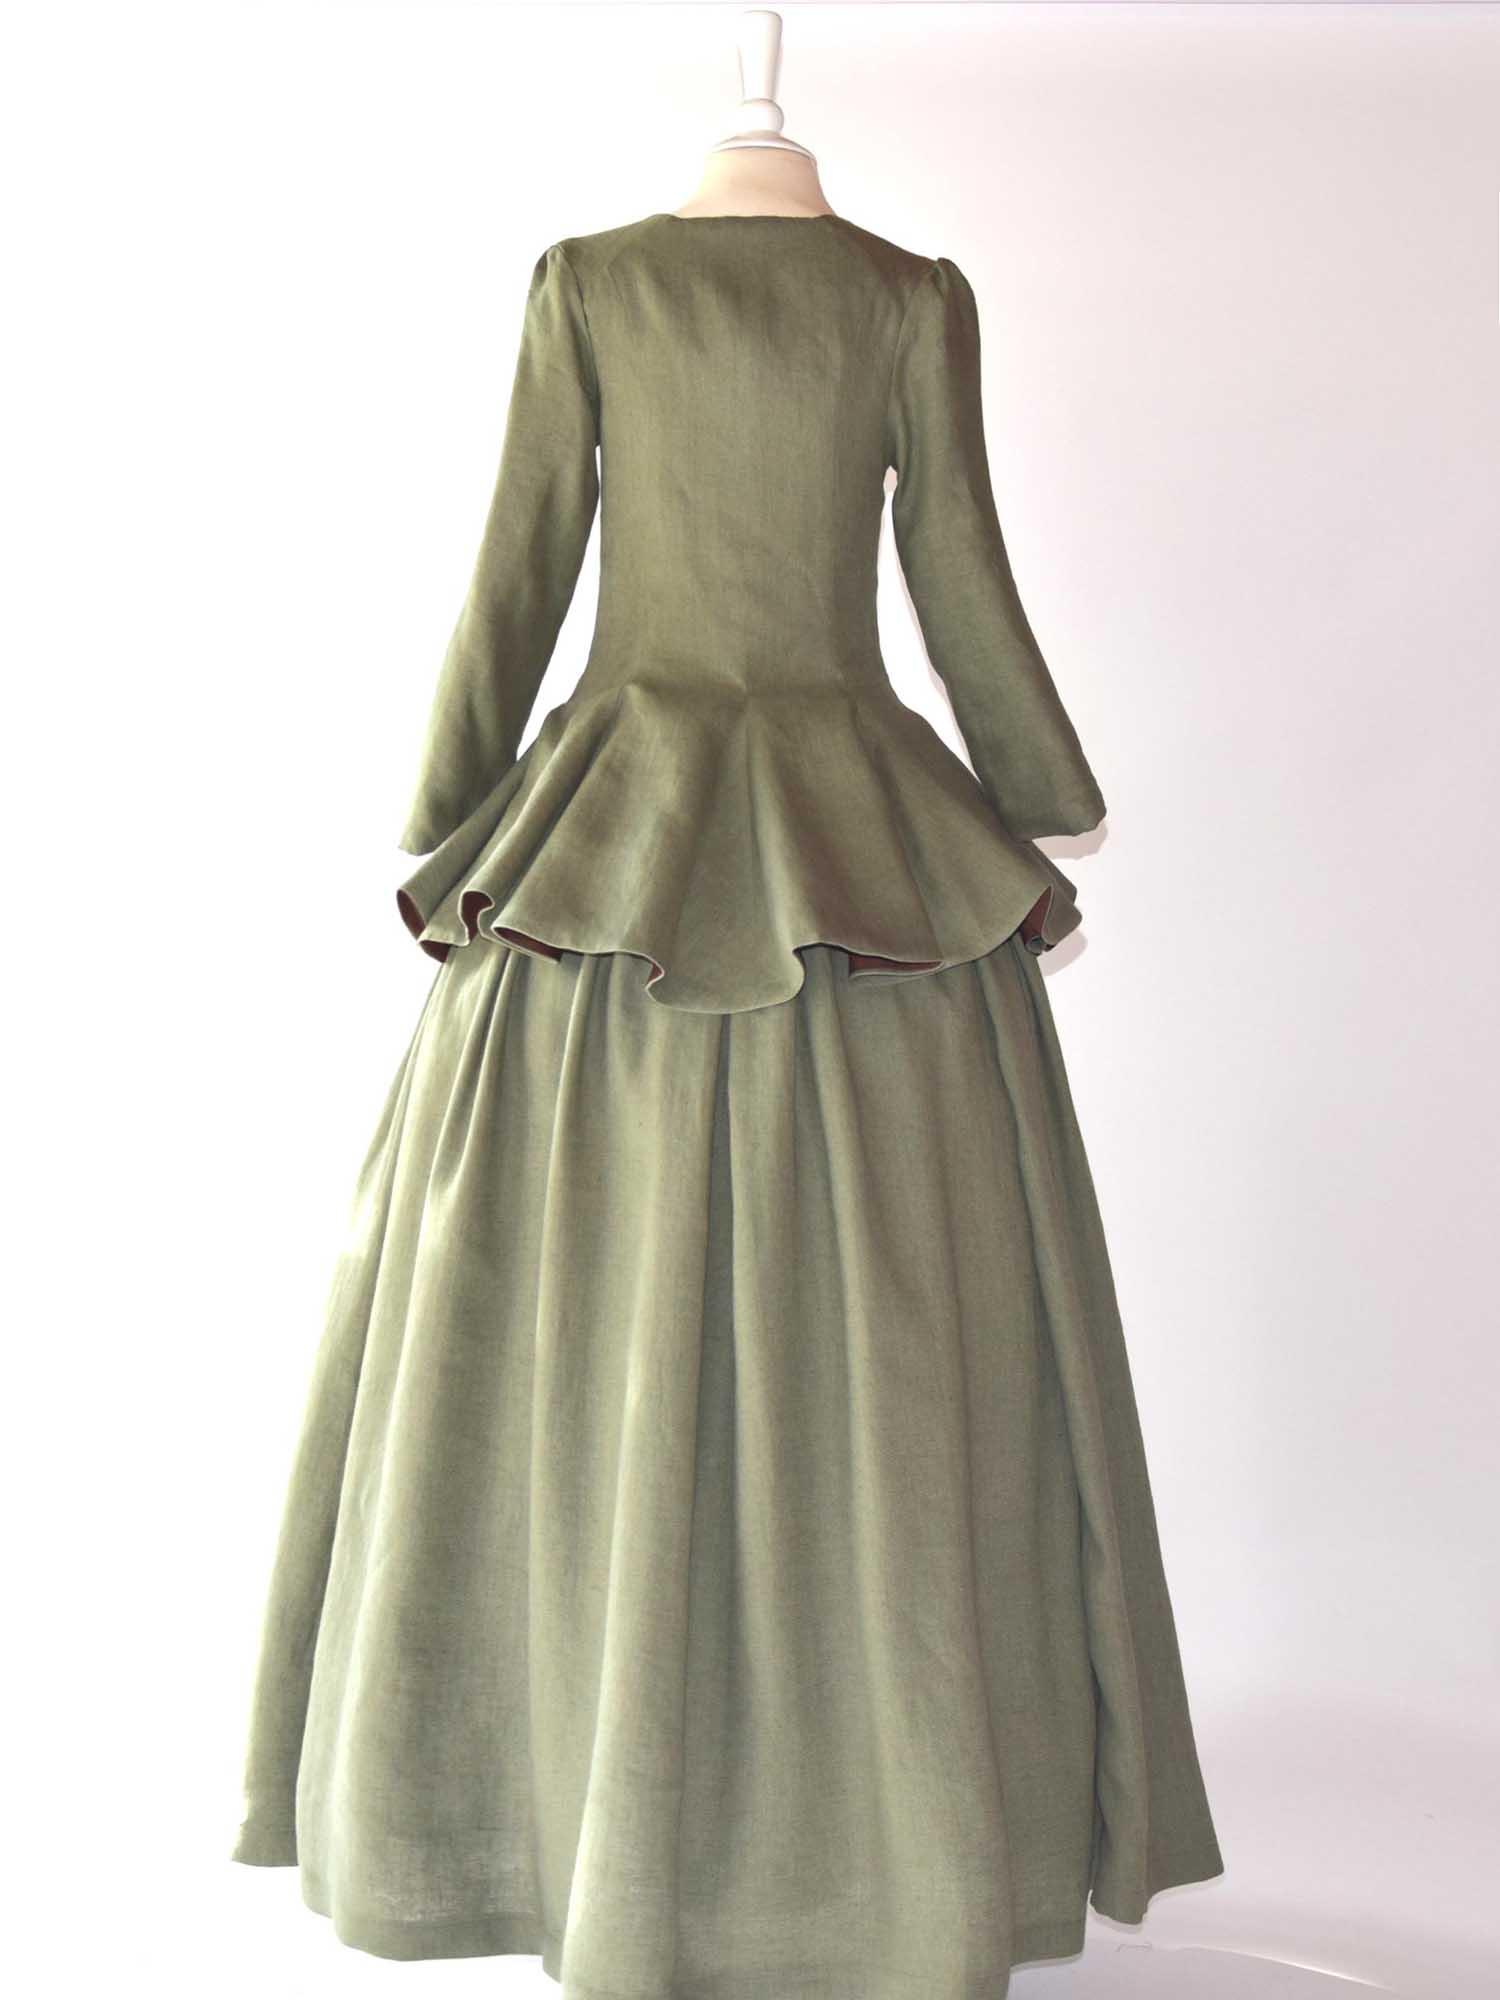 JANET, Colonial Costume in Sage Green Linen - Atelier Serraspina